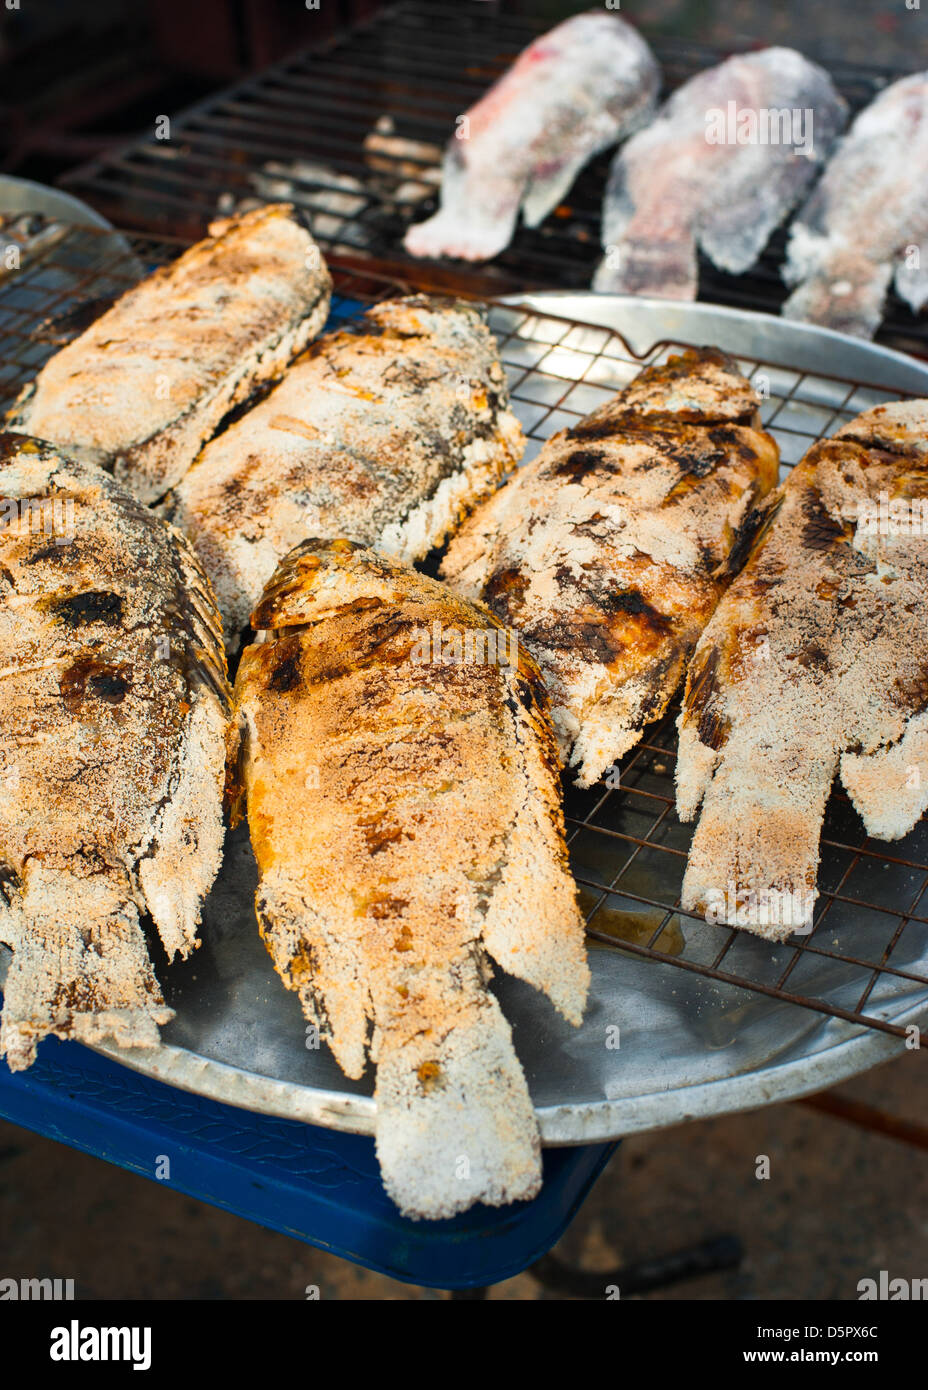 Traditional Thai food at market. Grilled salted fish Stock Photo